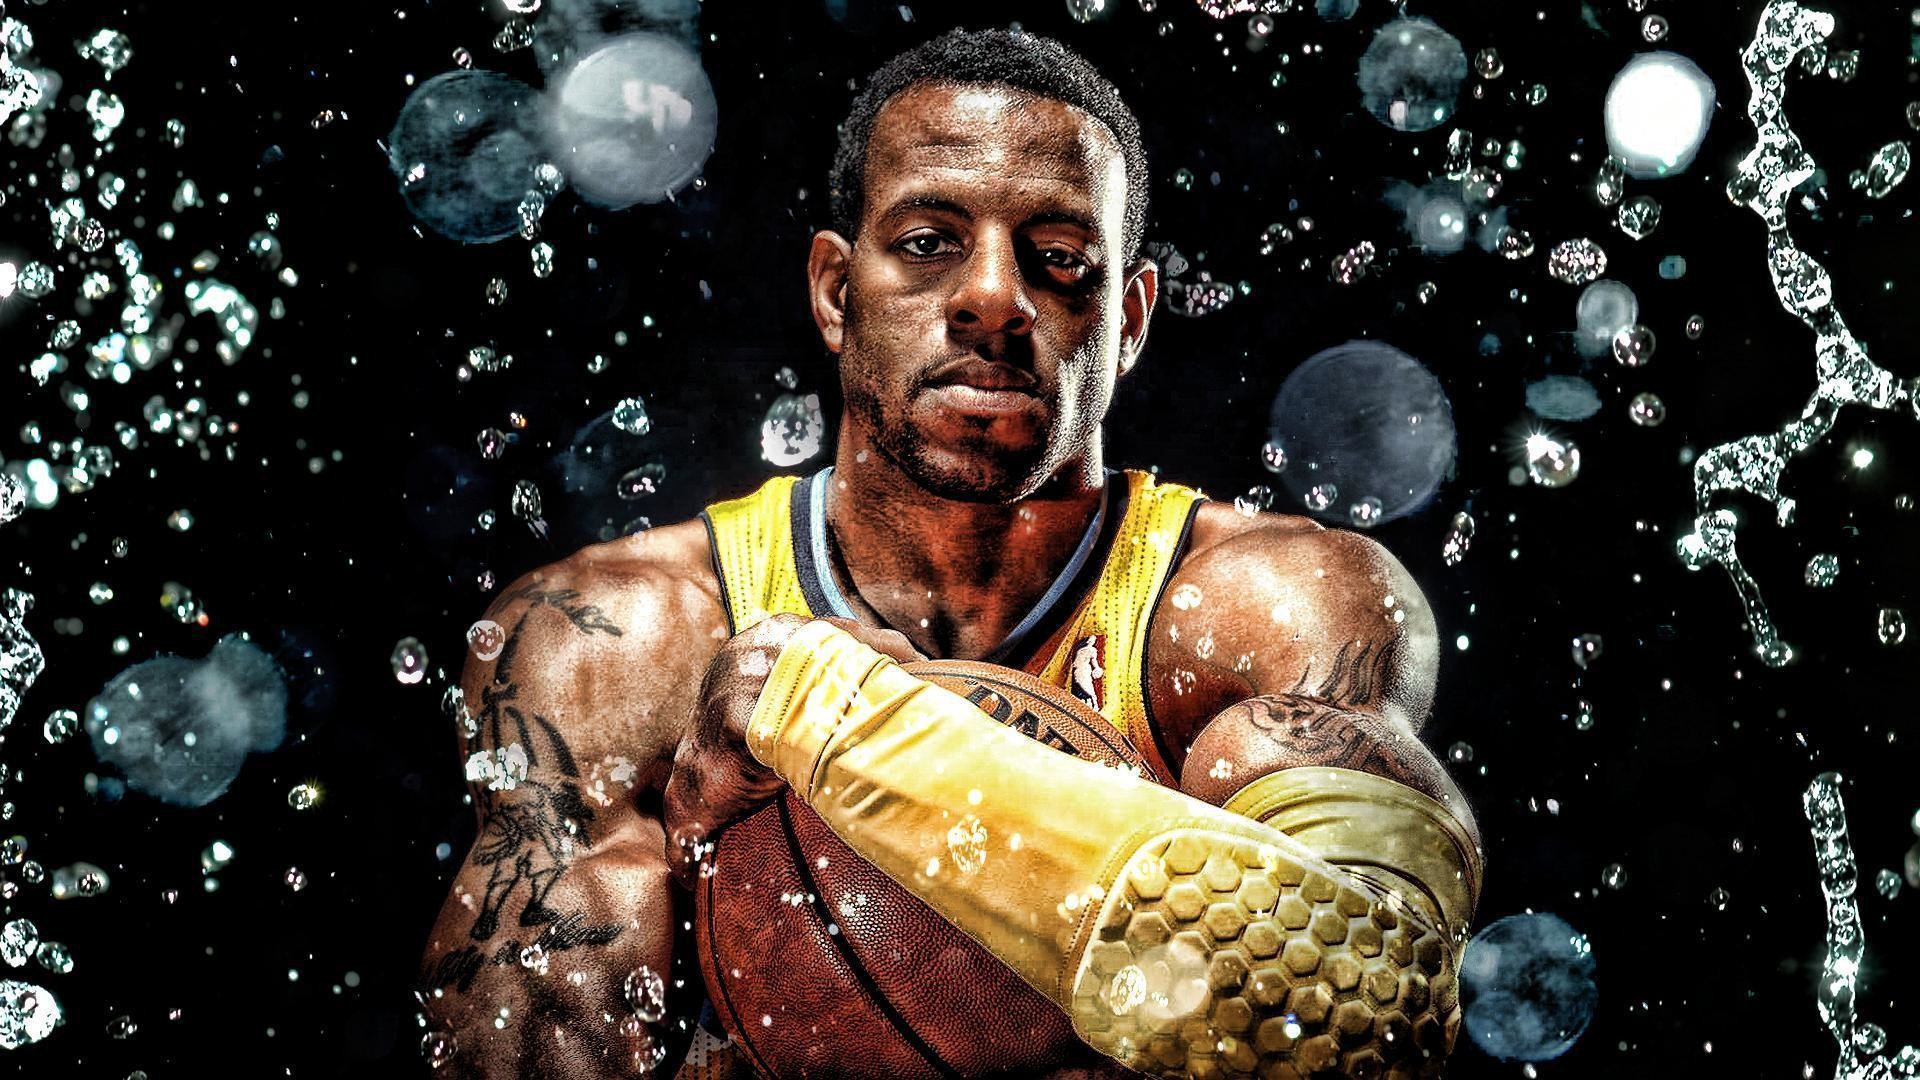 Andre Iguodala Wallpaper Pictures